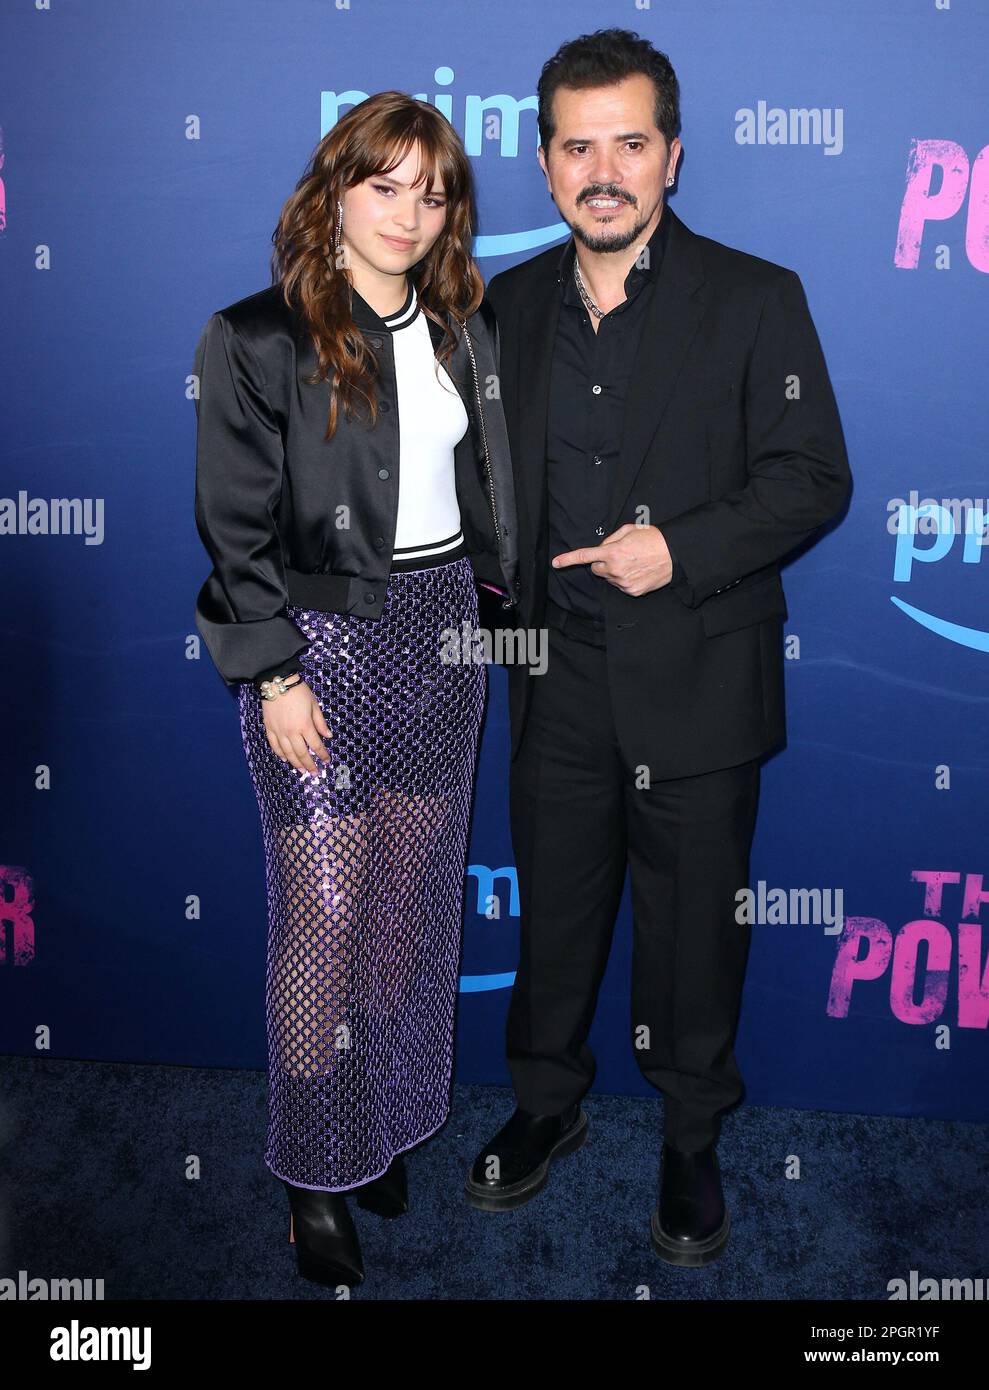 New York City, United States. 23rd Mar, 2023. John Leguizamo with his daughter Allegra Leguizamo attend the premiere of the TV series season 1 'The Power' at the DGA theater in New York City, NY, USA on March 23, 2023. Photo by Charles Guerin/ABACAPRESS.COM Credit: Abaca Press/Alamy Live News Stock Photo